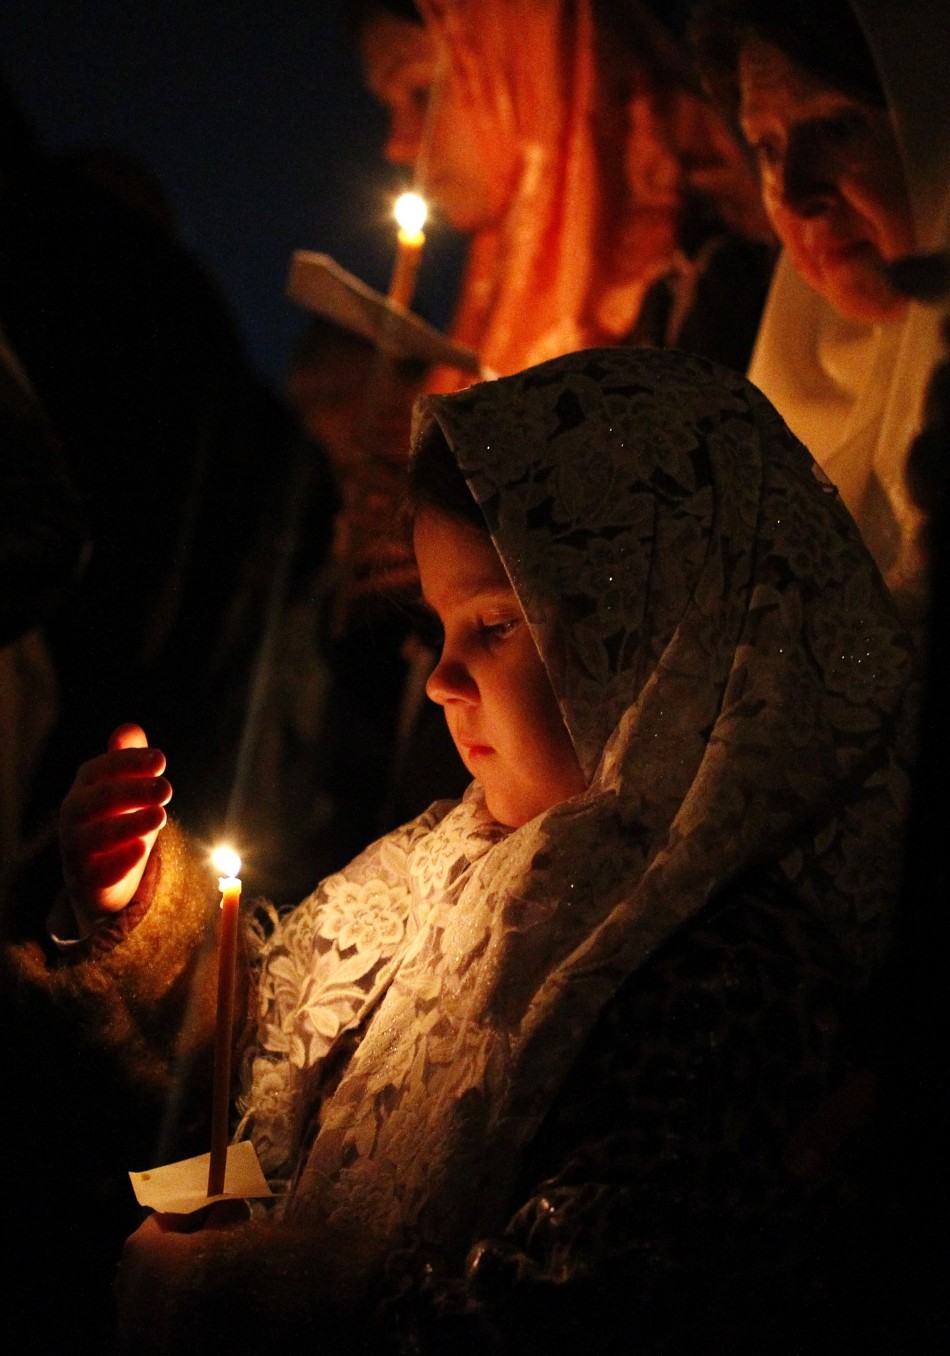 Russian Orthodox Old Believers hold candles during an Easter service at a church in Moscow